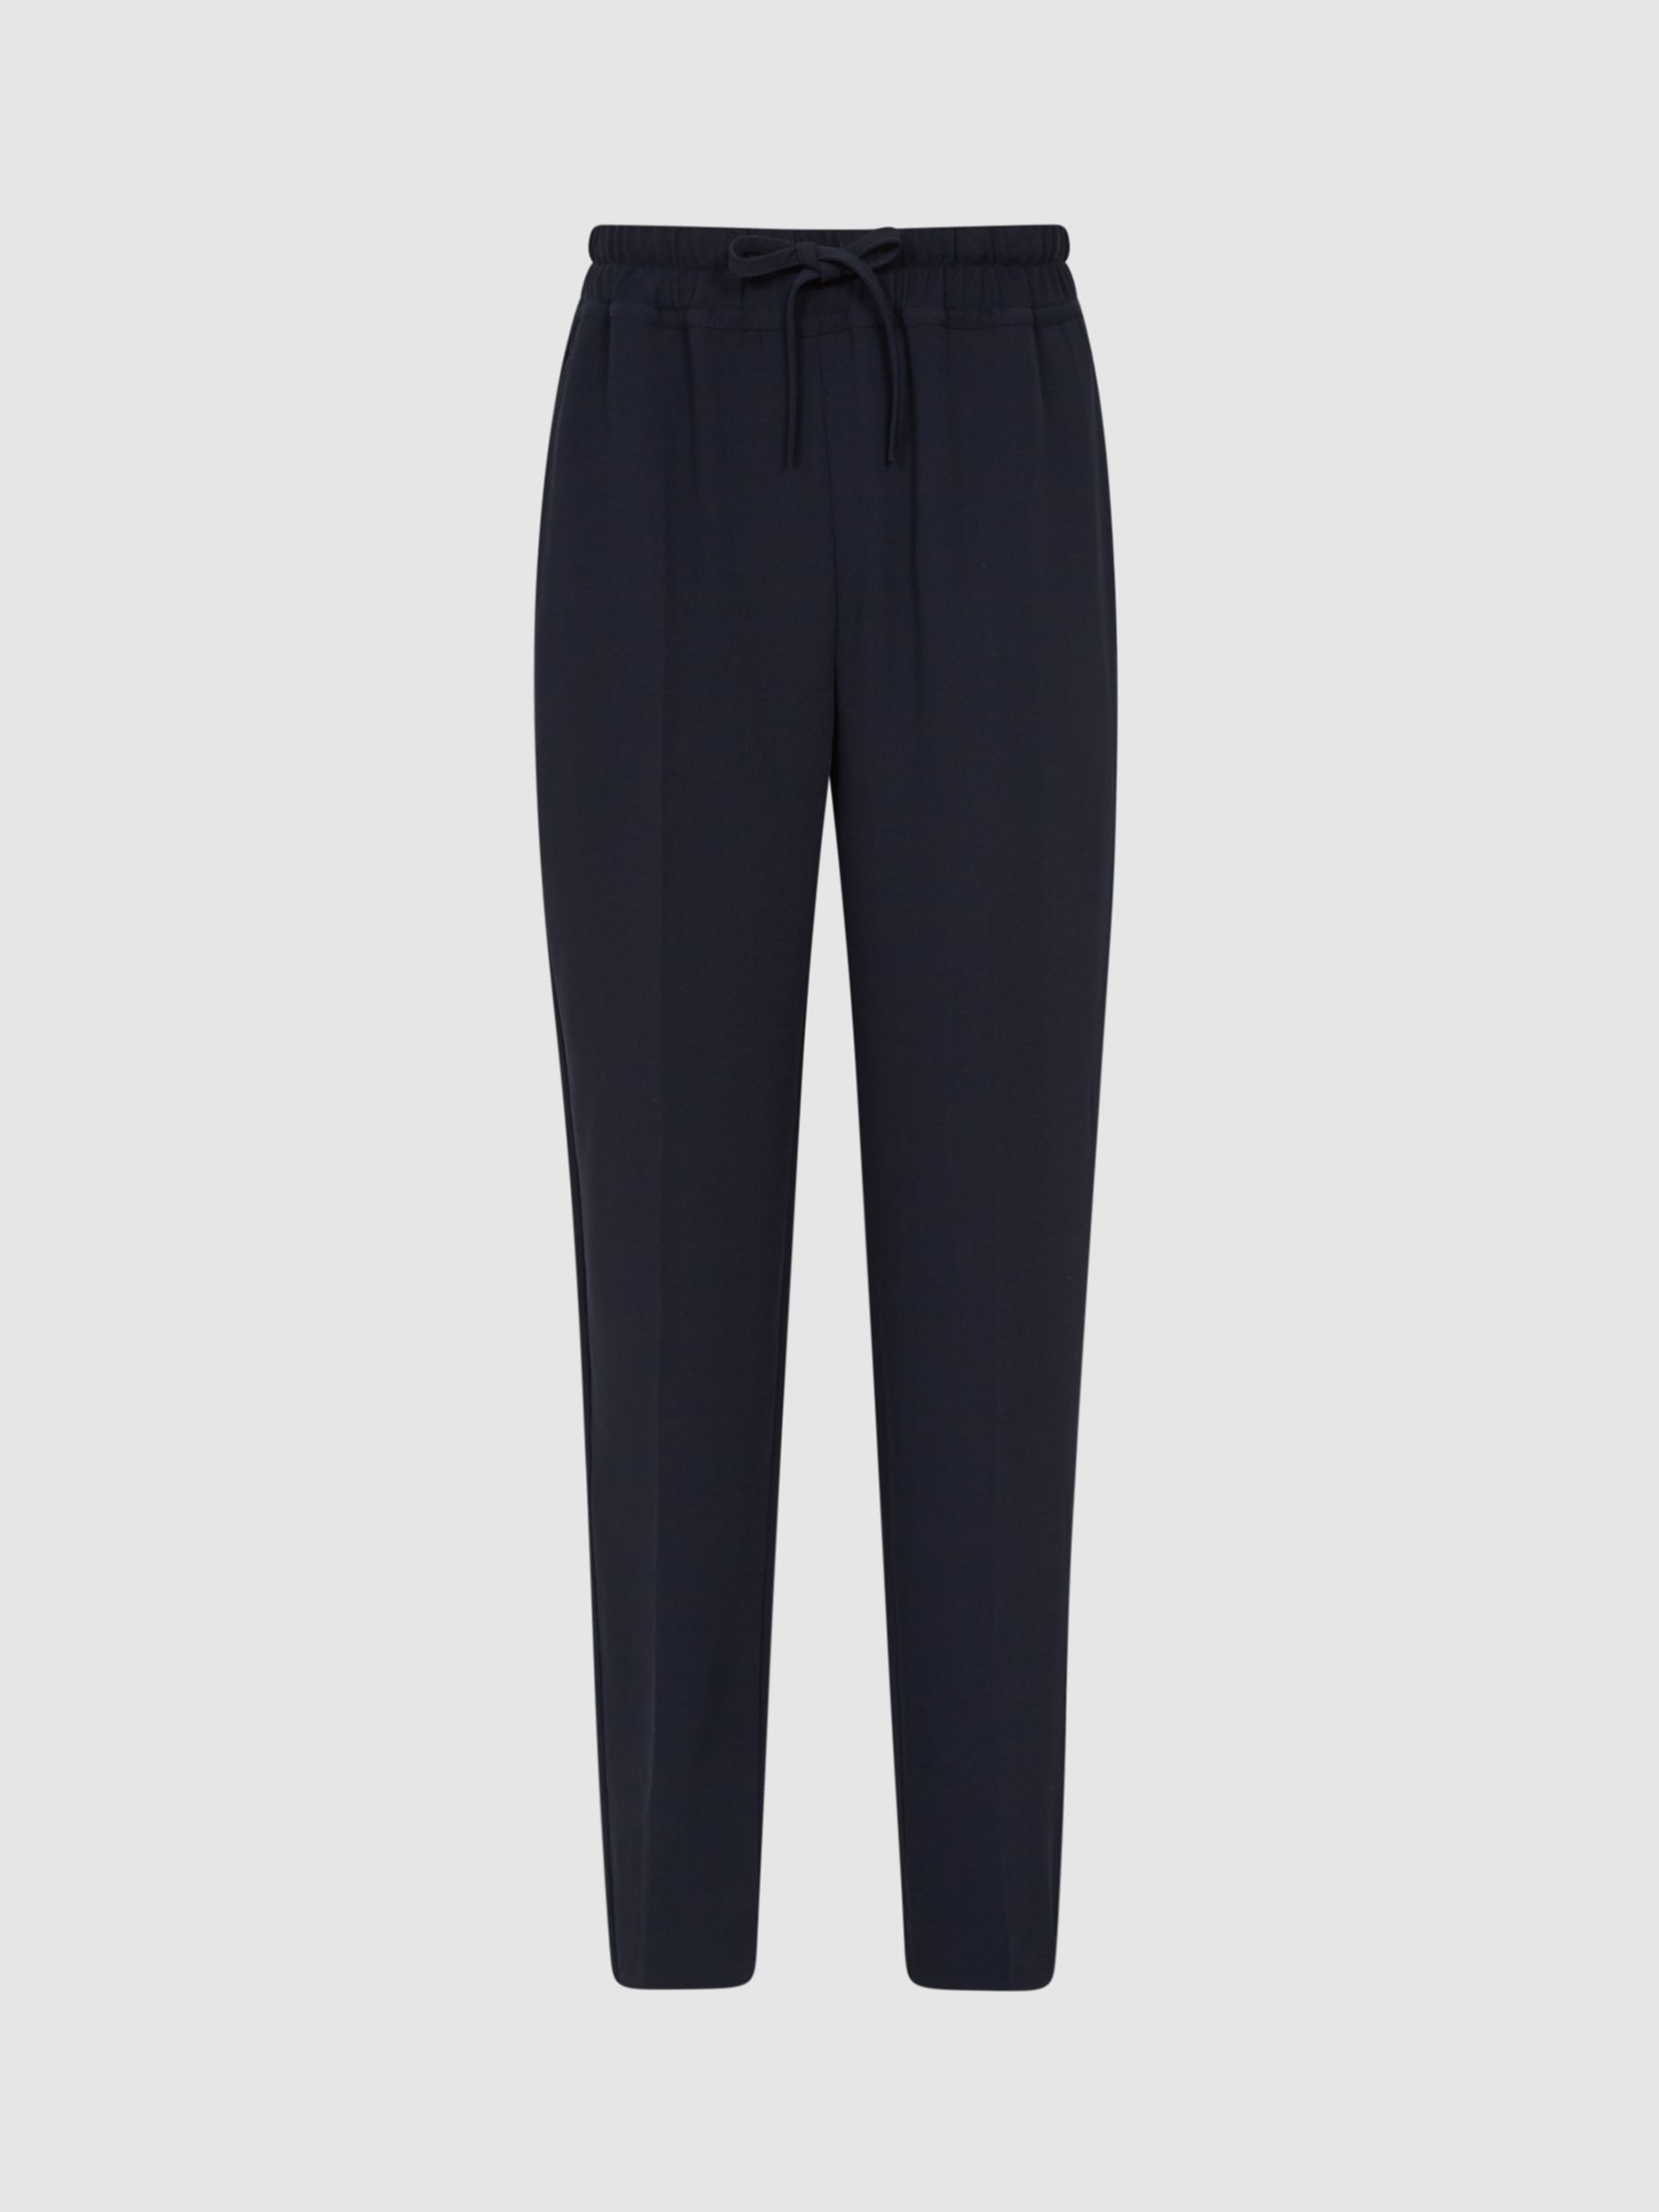 Reiss Hailey Ankle Grazer Trousers, Navy at John Lewis & Partners